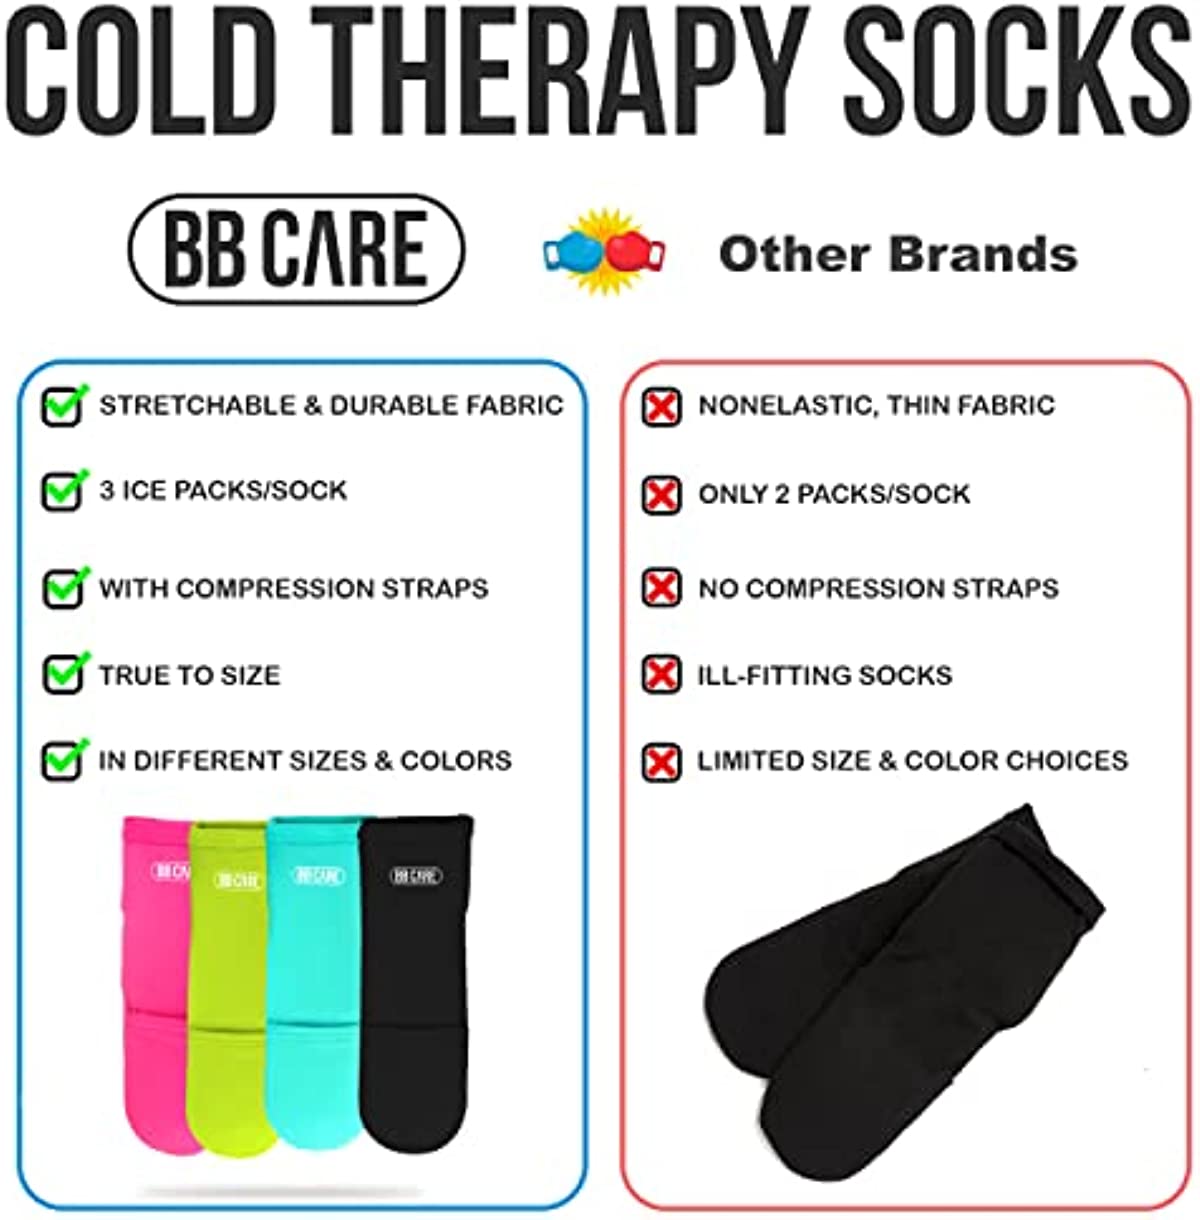 [Premium] Cold Therapy Socks, Foot Ice Pack, w/Compression Straps, Swollen Feet, Arthritis, Ice Packs for Foot Neuropathy Relief, Plantar Fasciitis, Chemotherapy Care (Black, Large, 11 inch)